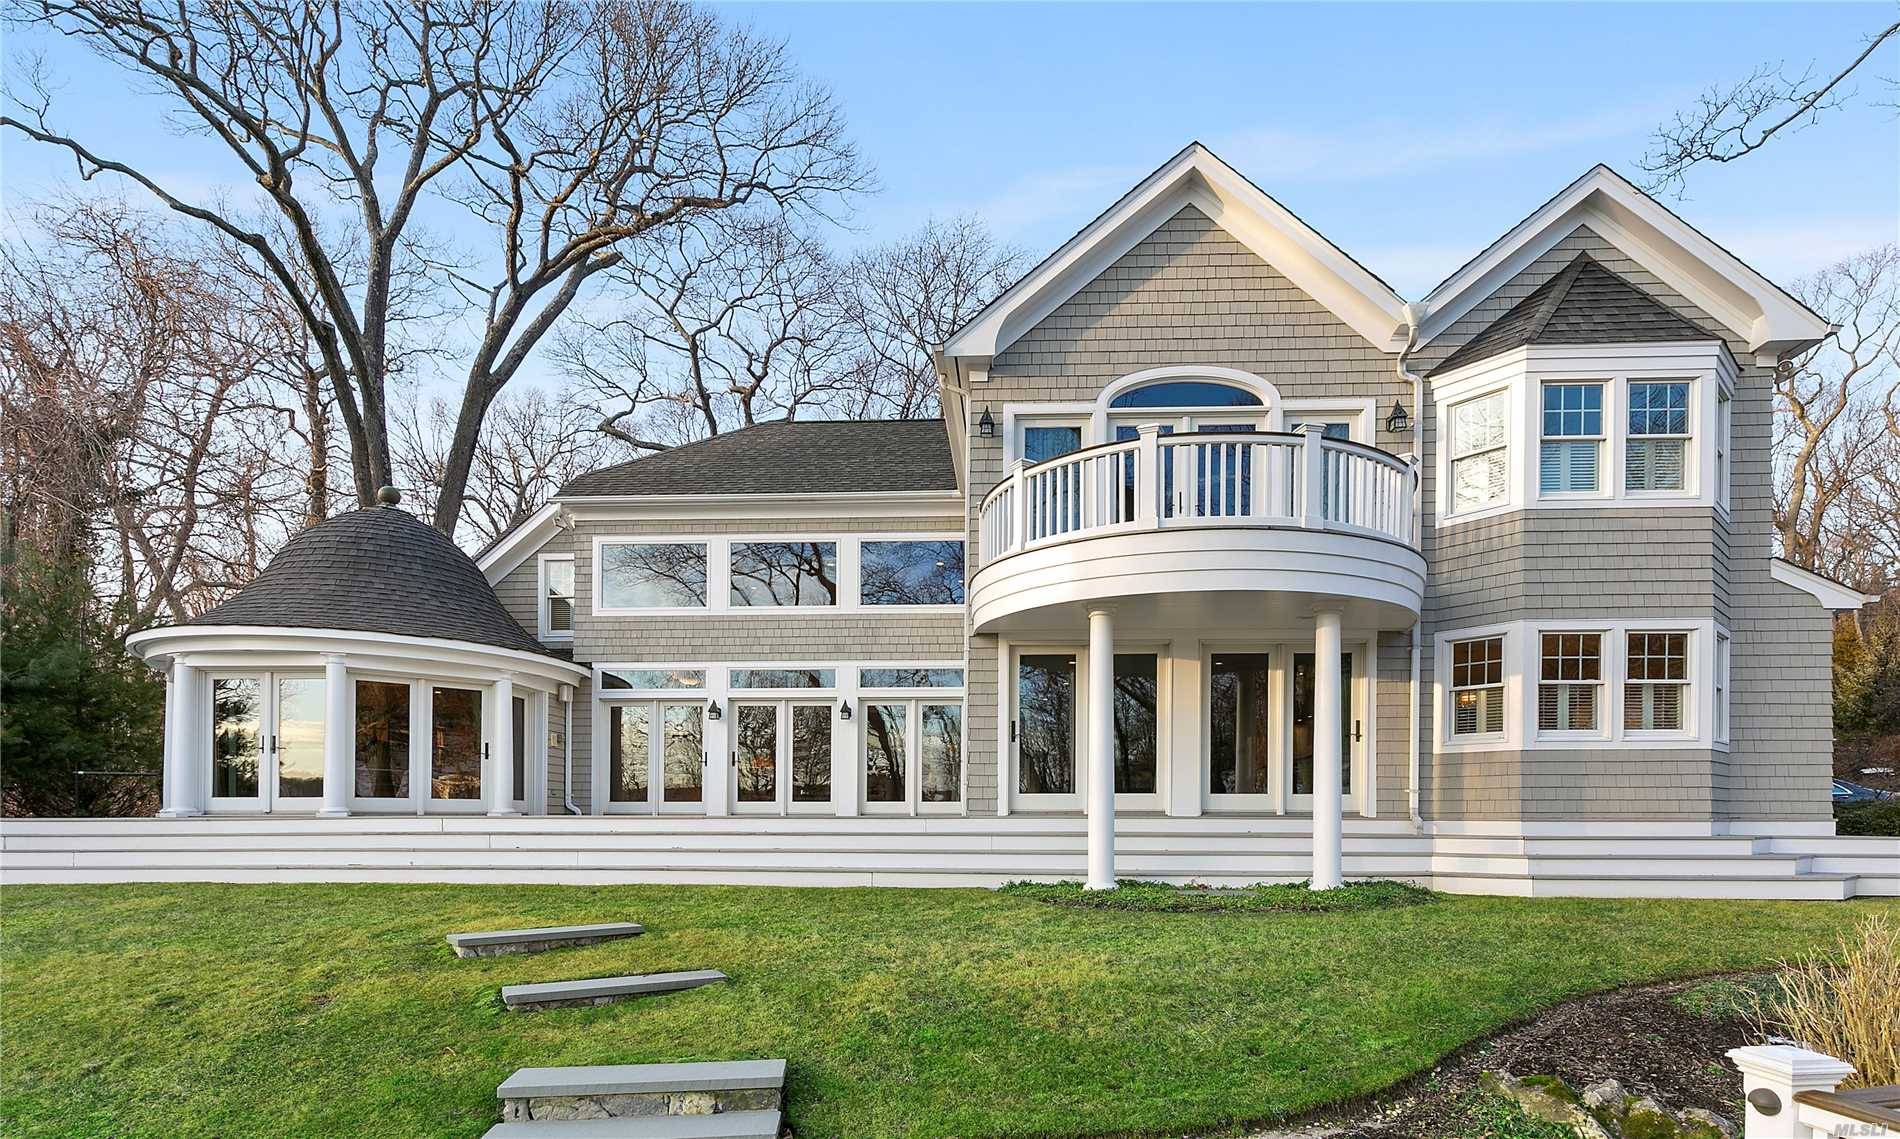 Sitting Steadfastly In One Of The North Shore's Most Exclusive Neighborhoods, Is A Sophisticated, Sun Drenched, Waterview Nantucket Style Estate Surrounded By An Award Winning Pool Retreat And Landscape Design.